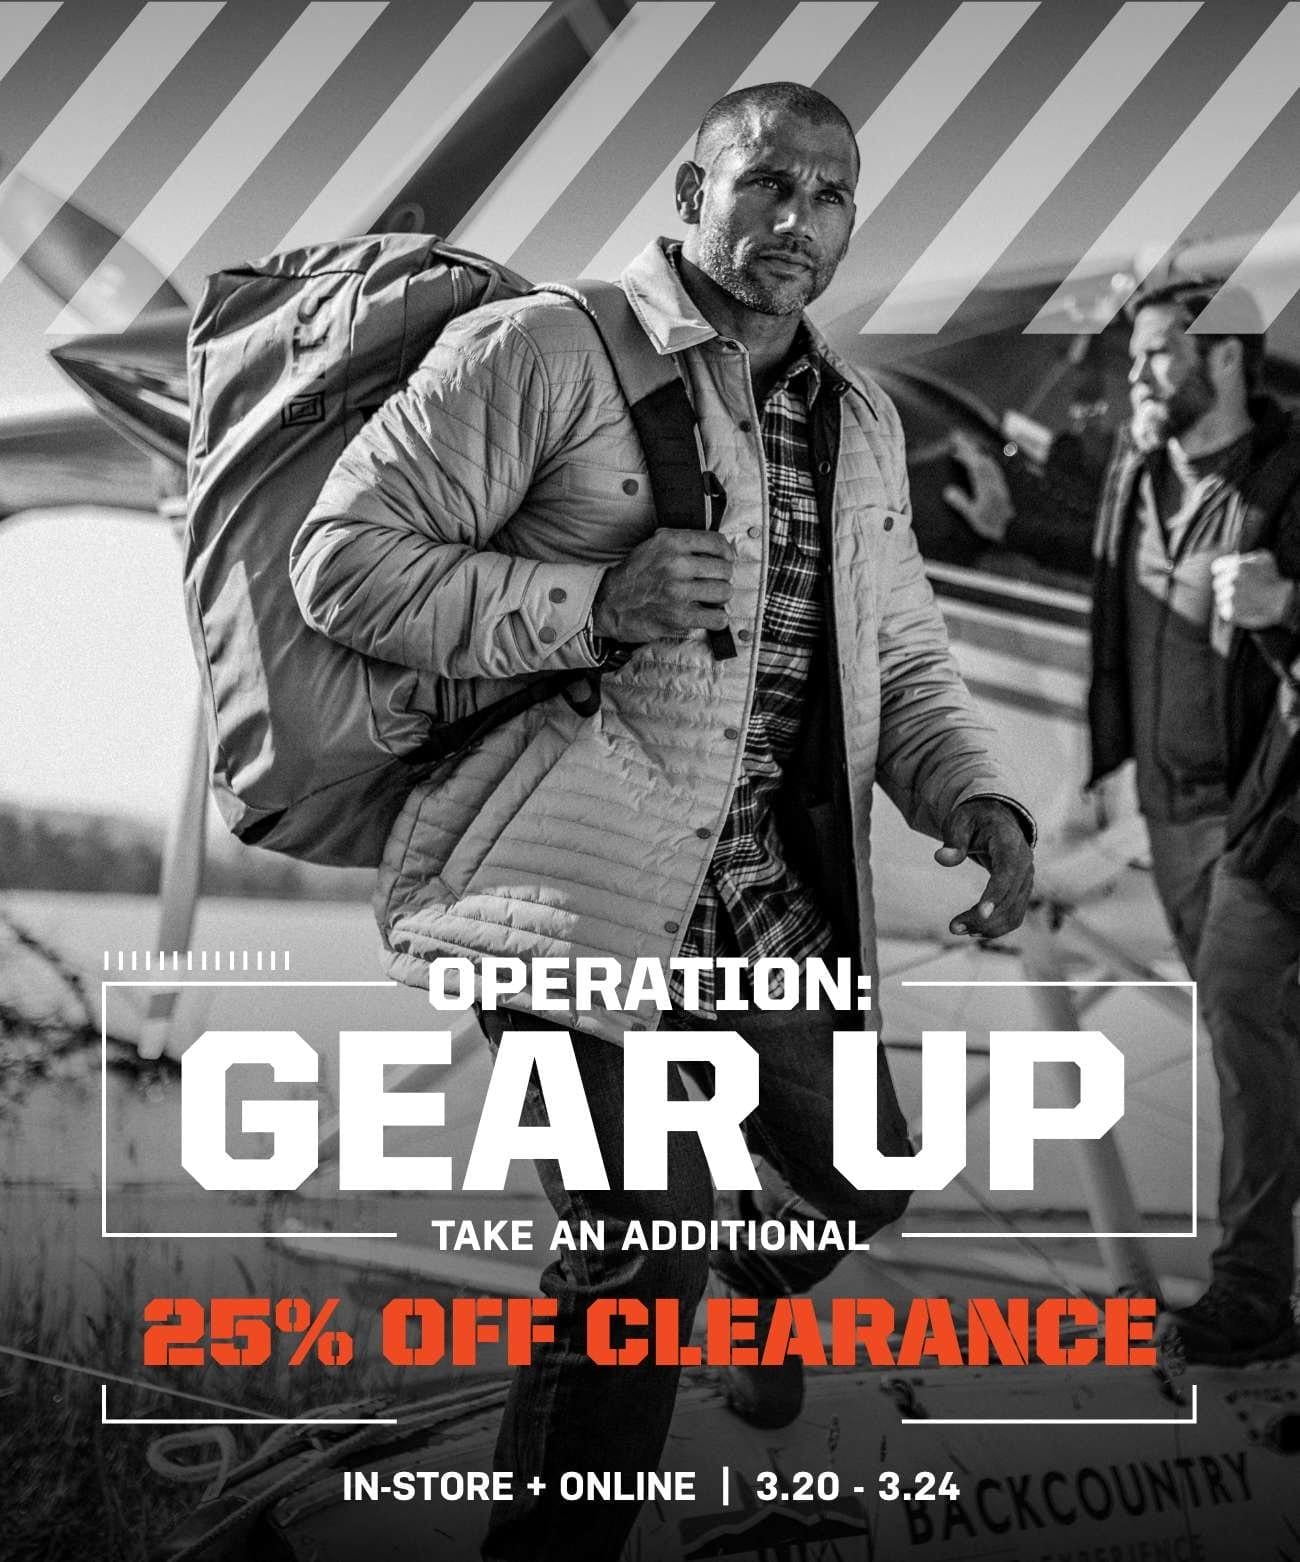 Operation: Gear Up | Take an additional 25% off clearance | in-store + online | 3.20 - 3.24